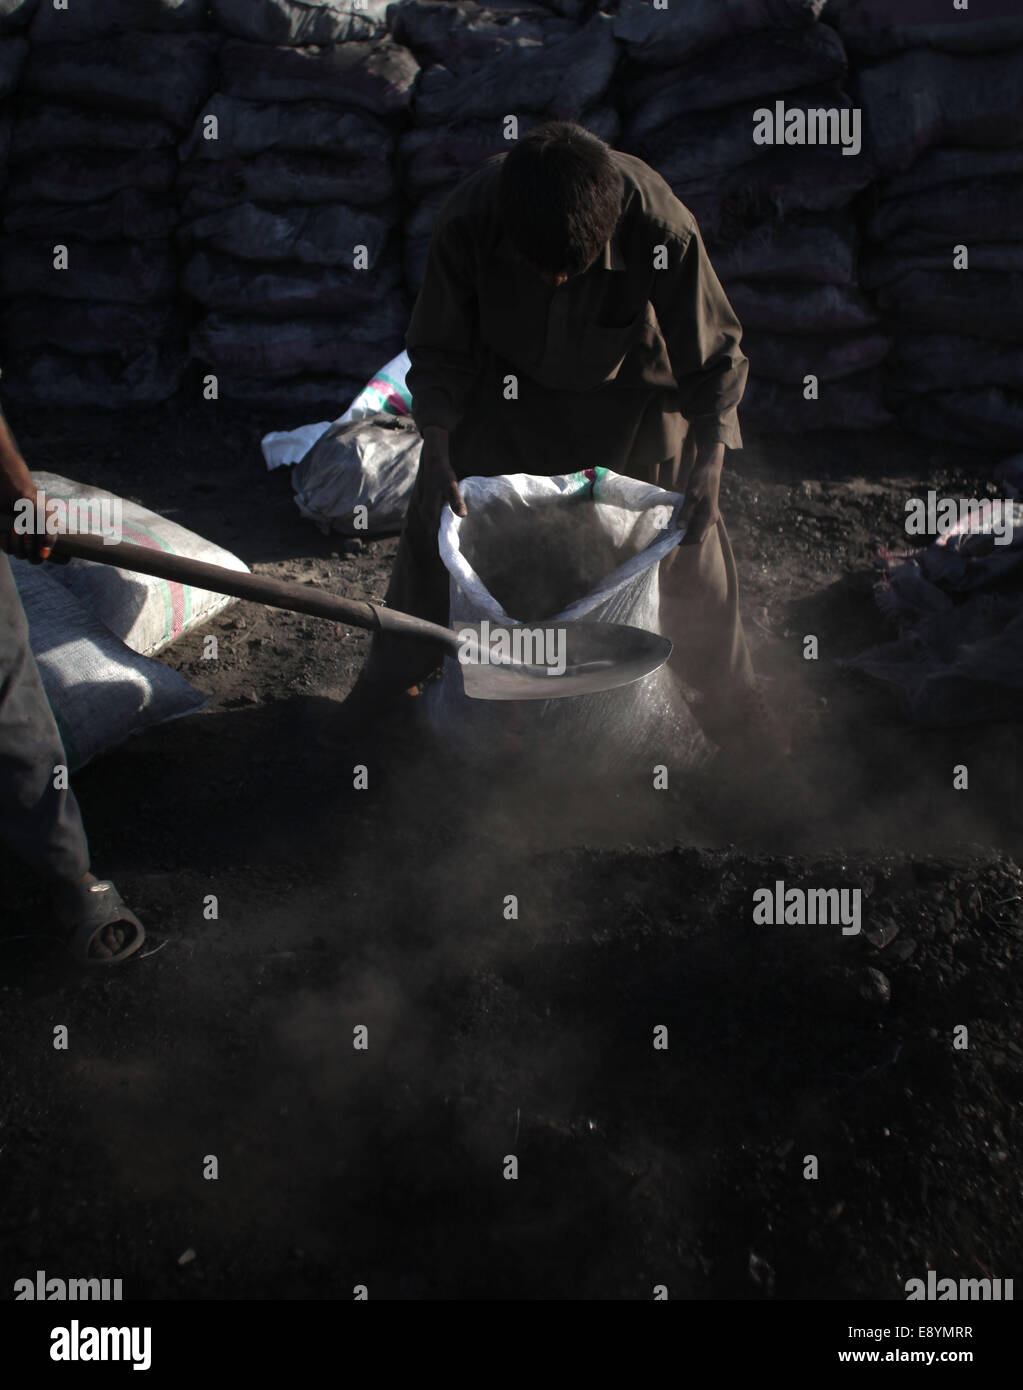 Kabul, Afghanistan. 16th Oct, 2014. Laborers work at a coal market in Kabul, Afghanistan, Oct. 16, 2014. Afghan people are preparing fuel for the upcoming winter. © Ahmad Massoud/Xinhua/Alamy Live News Stock Photo